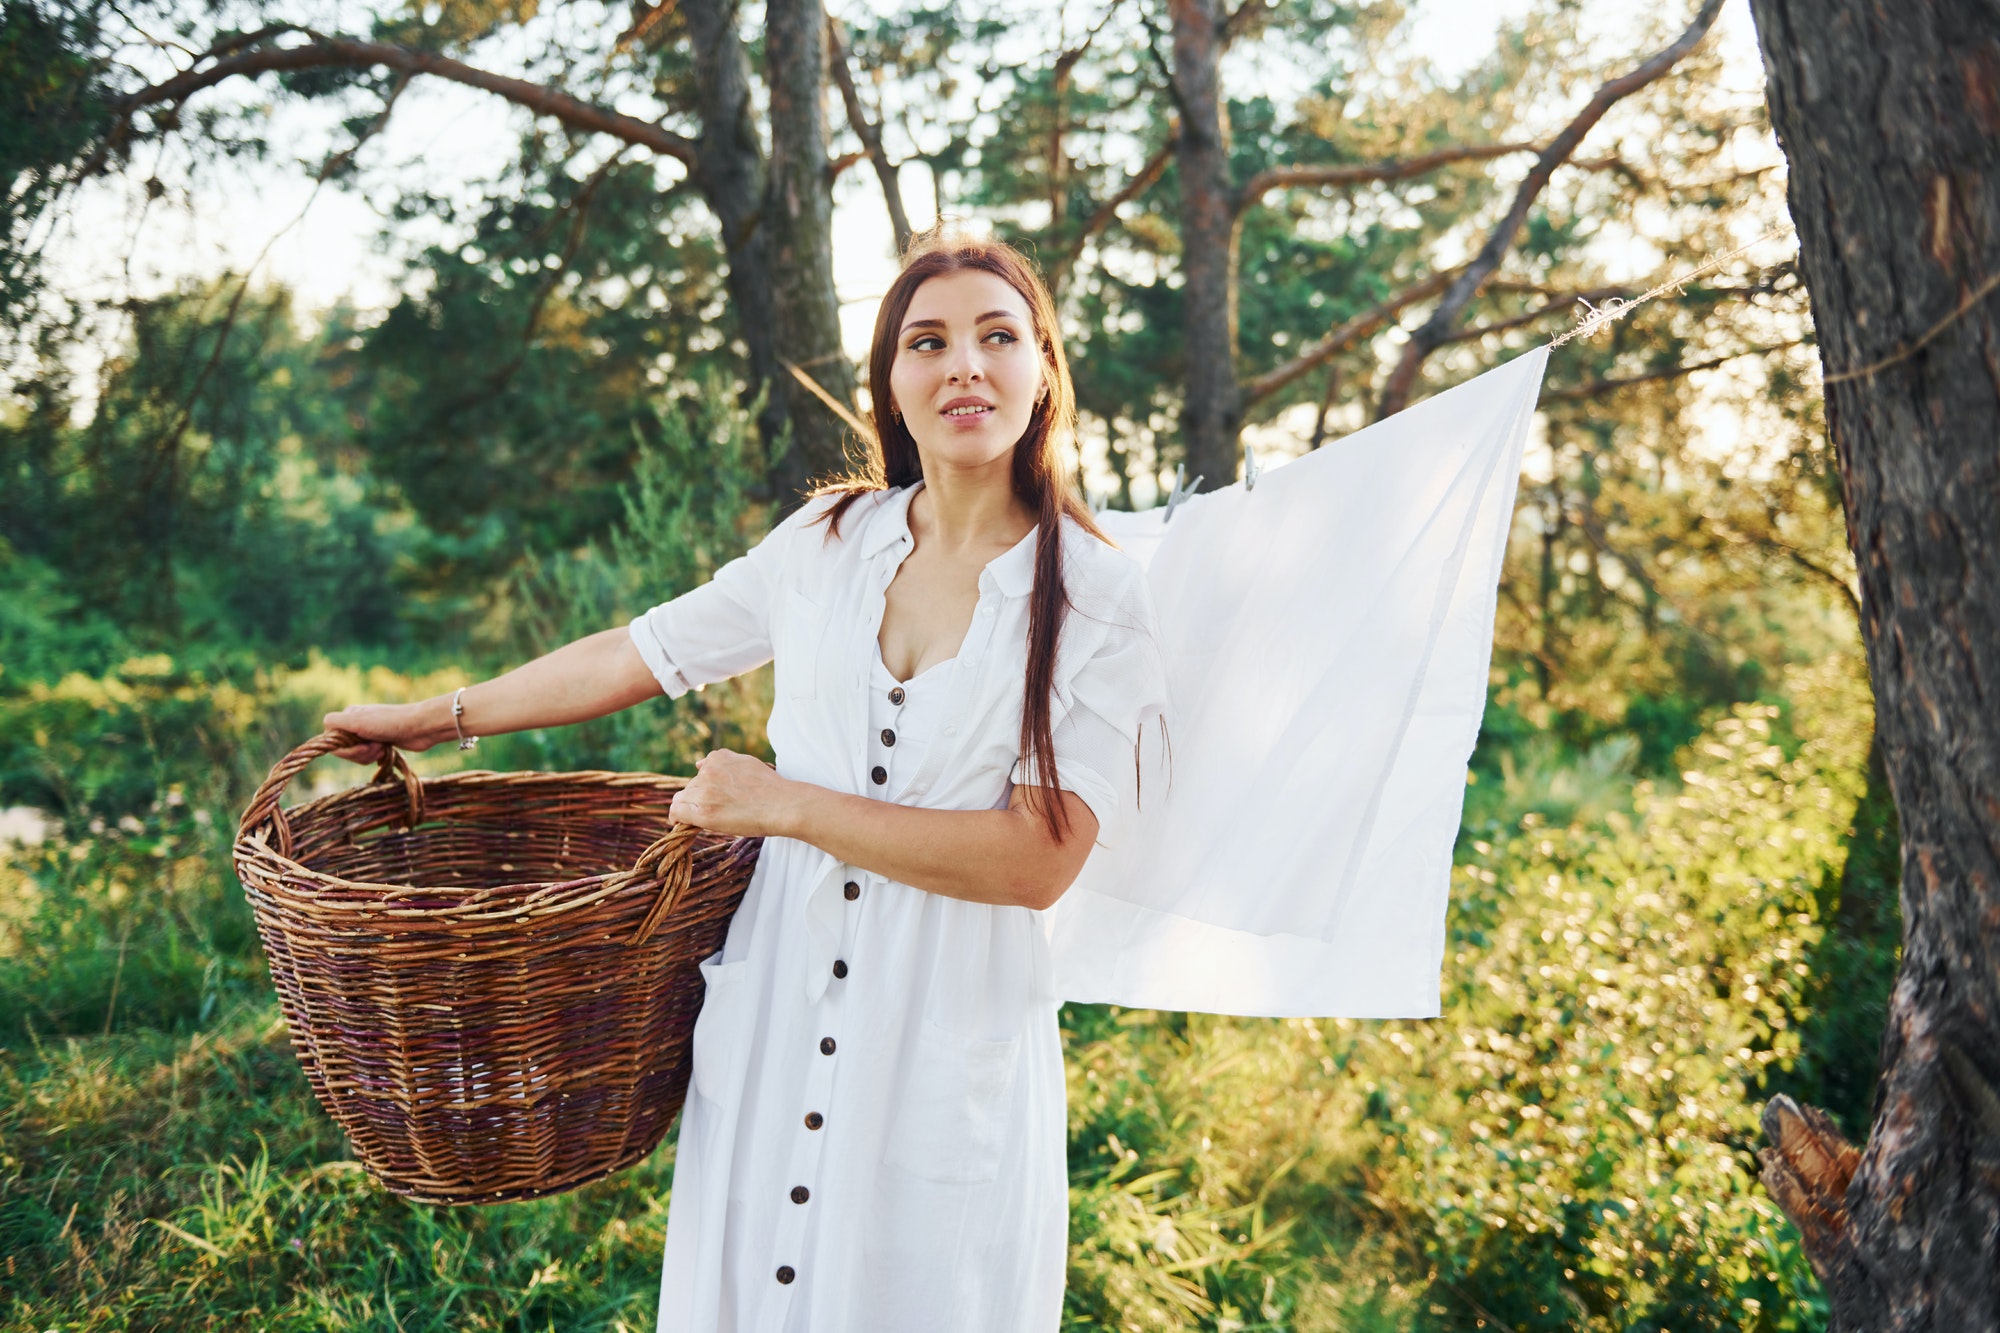 Young housewife with basket in hands hangs up washed clean white cloth to dry